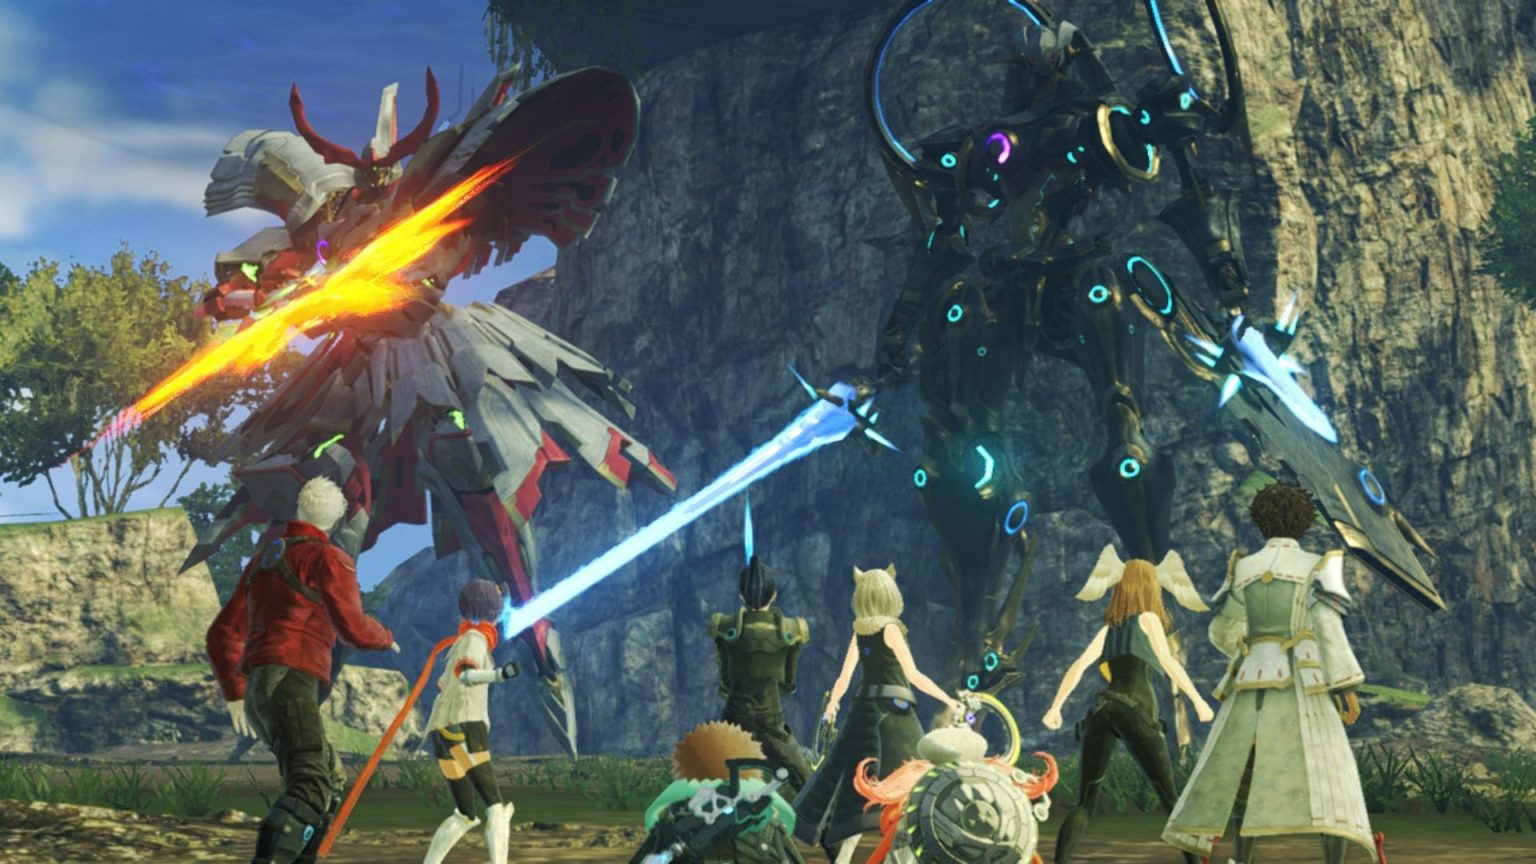 Xenoblade Chronicles 3 is a Brilliant Story with MuchImproved Gameplay